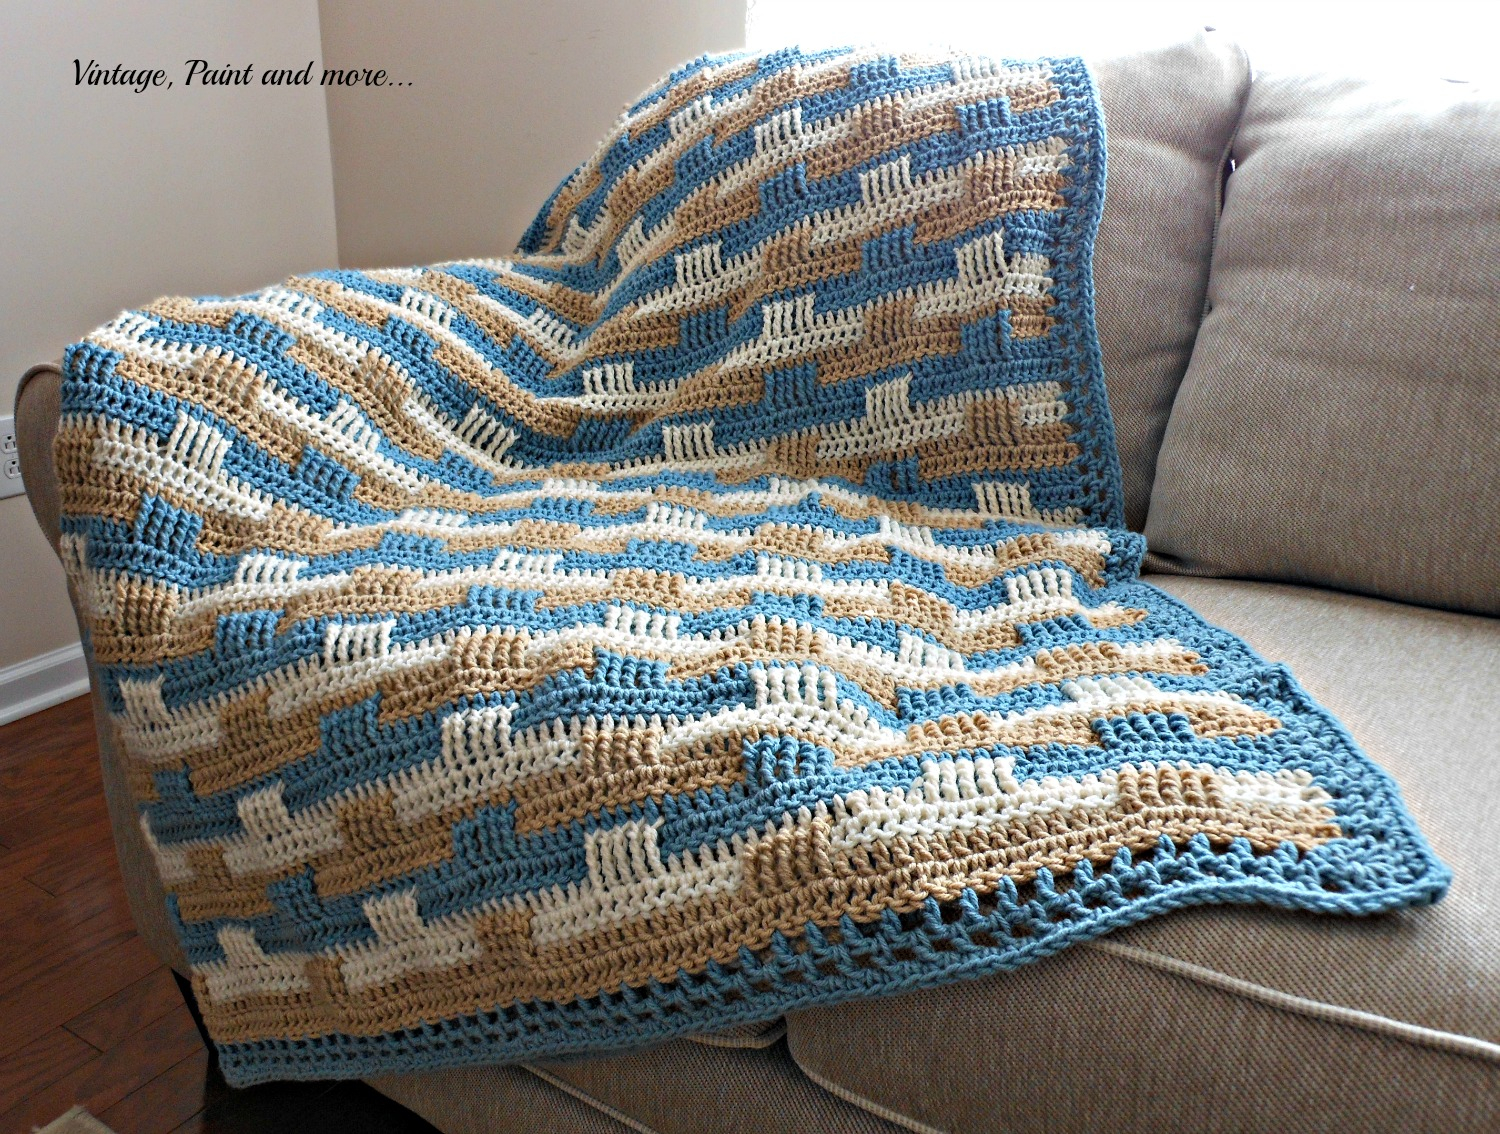 Easy Basket Weave Crochet Pattern Crochet Afghan And Stenciled Pillow Vintage Paint And More